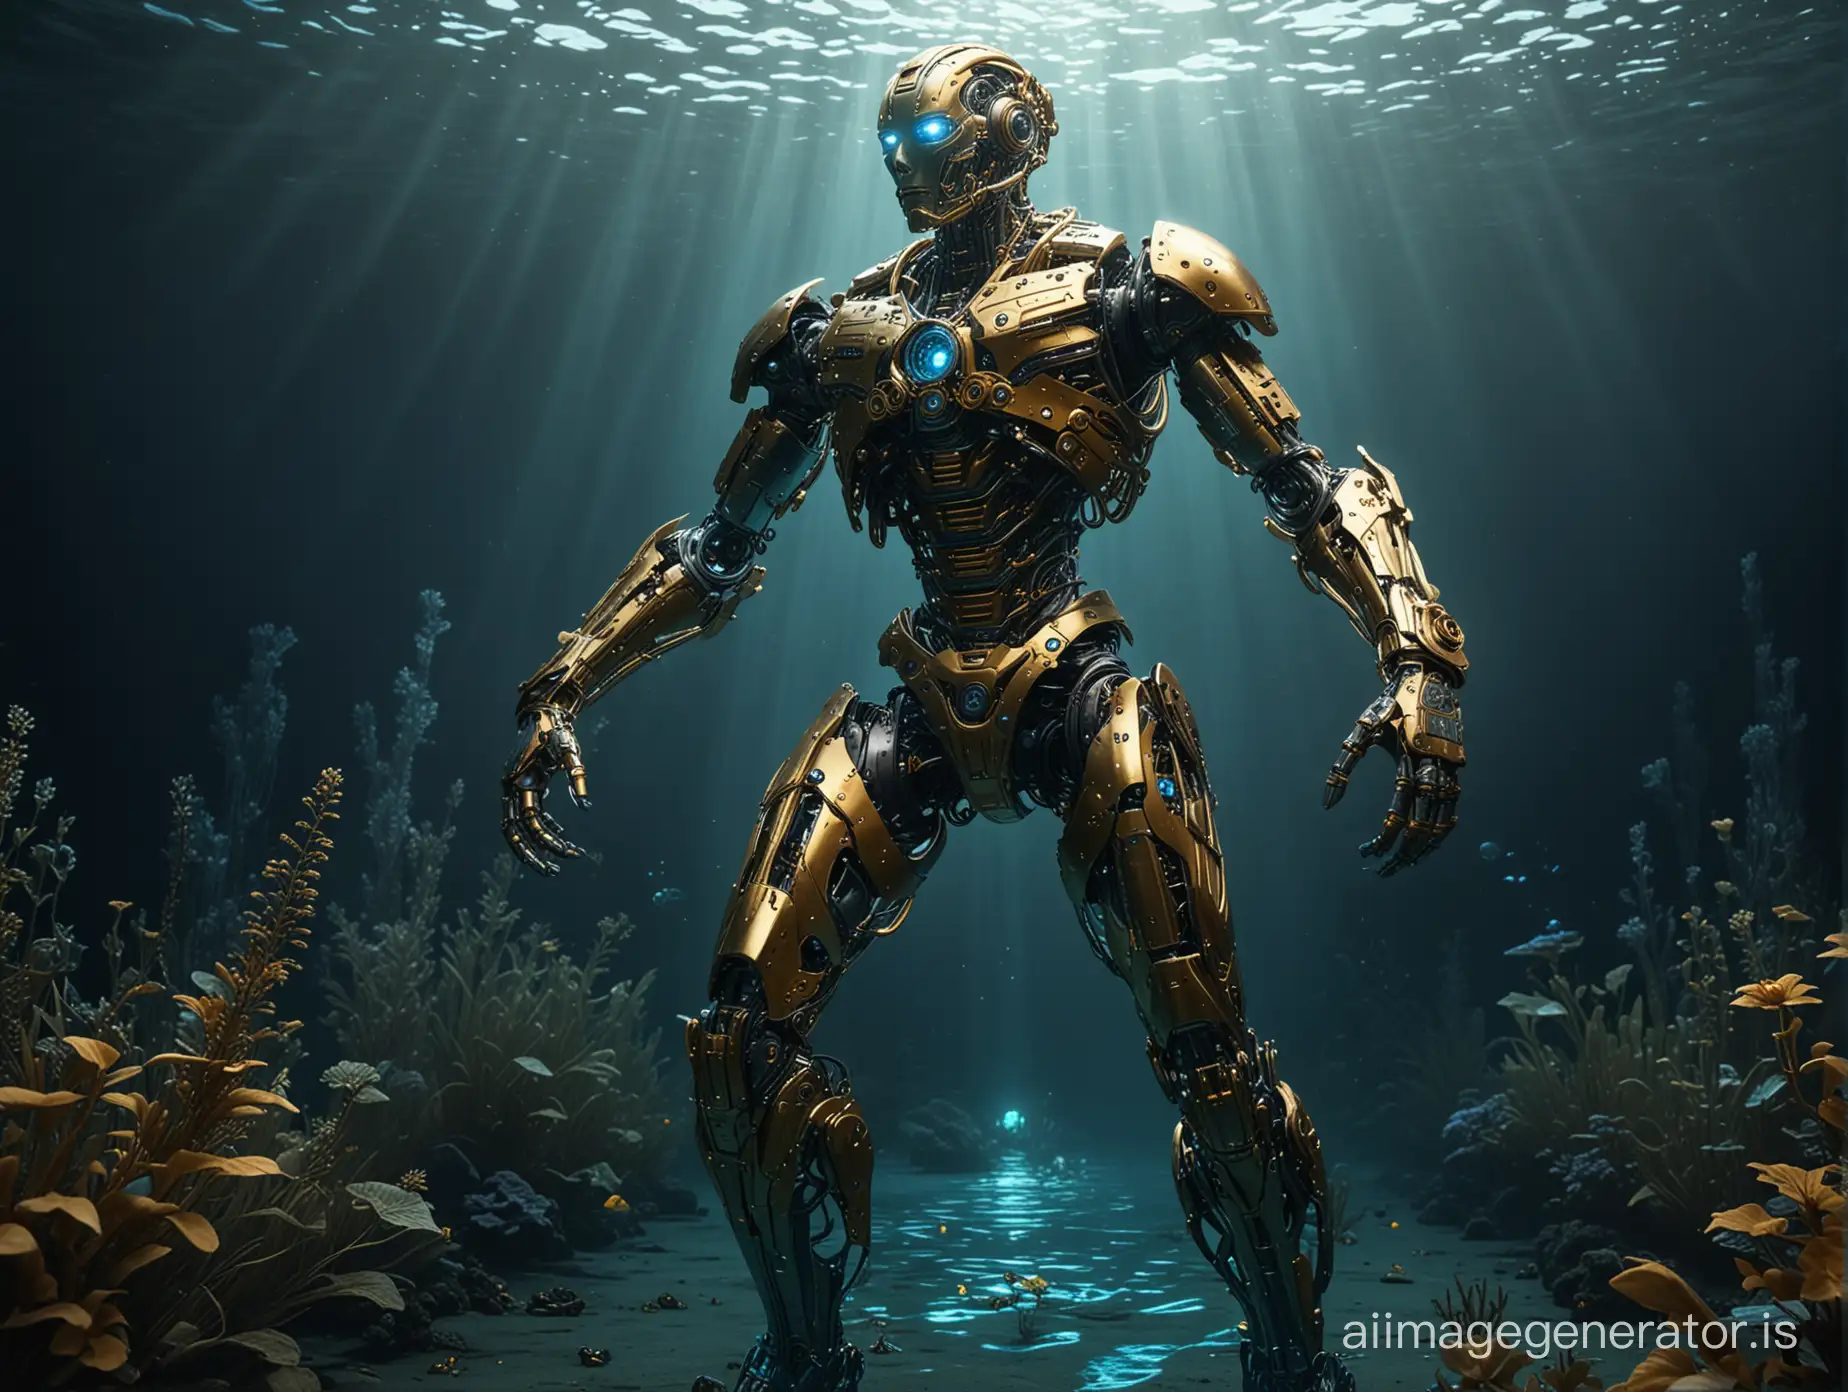 The complex, full body of mechanical cyborg shown in the 3D image, Various meticulously crafted mechanical parts come together to form a human body, Gold and dark blue metallic colors dominate walking dives into the Luminescent Depths where the glow of underwater flora illuminates the mysterious shadowed abys, front view